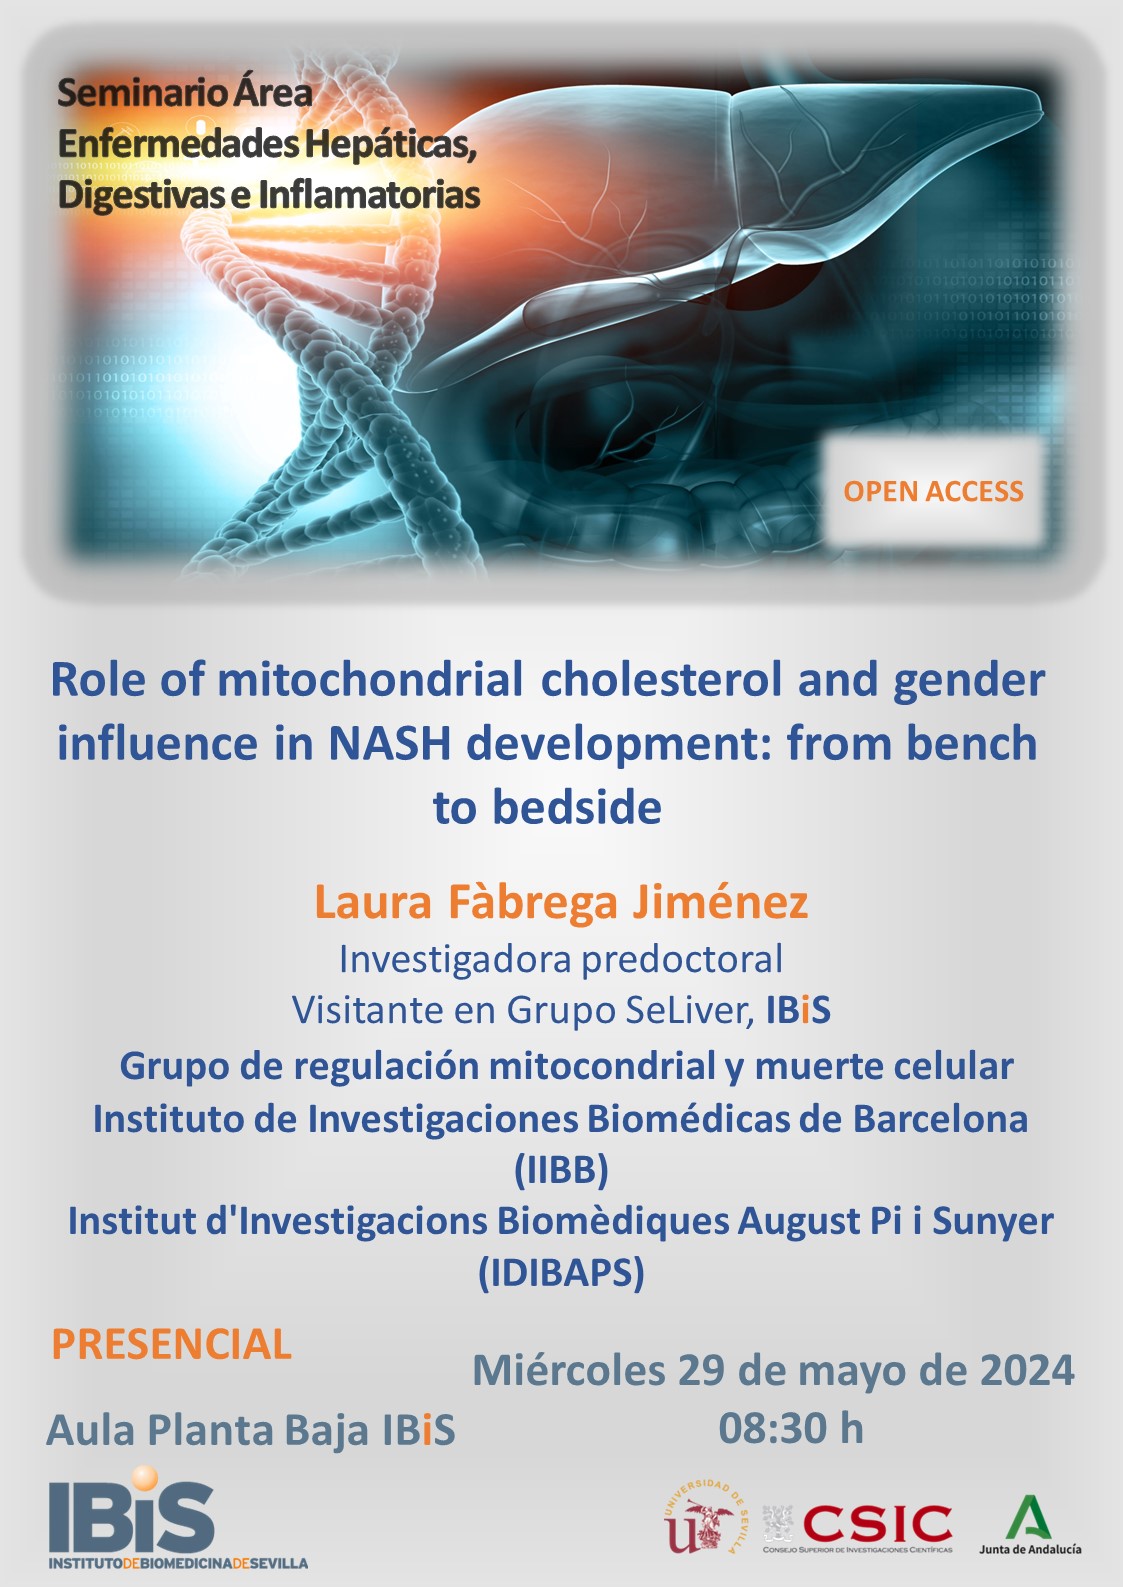 Poster: Role of mitochondrial cholesterol and gender influence in NASH development: from bench to bedside